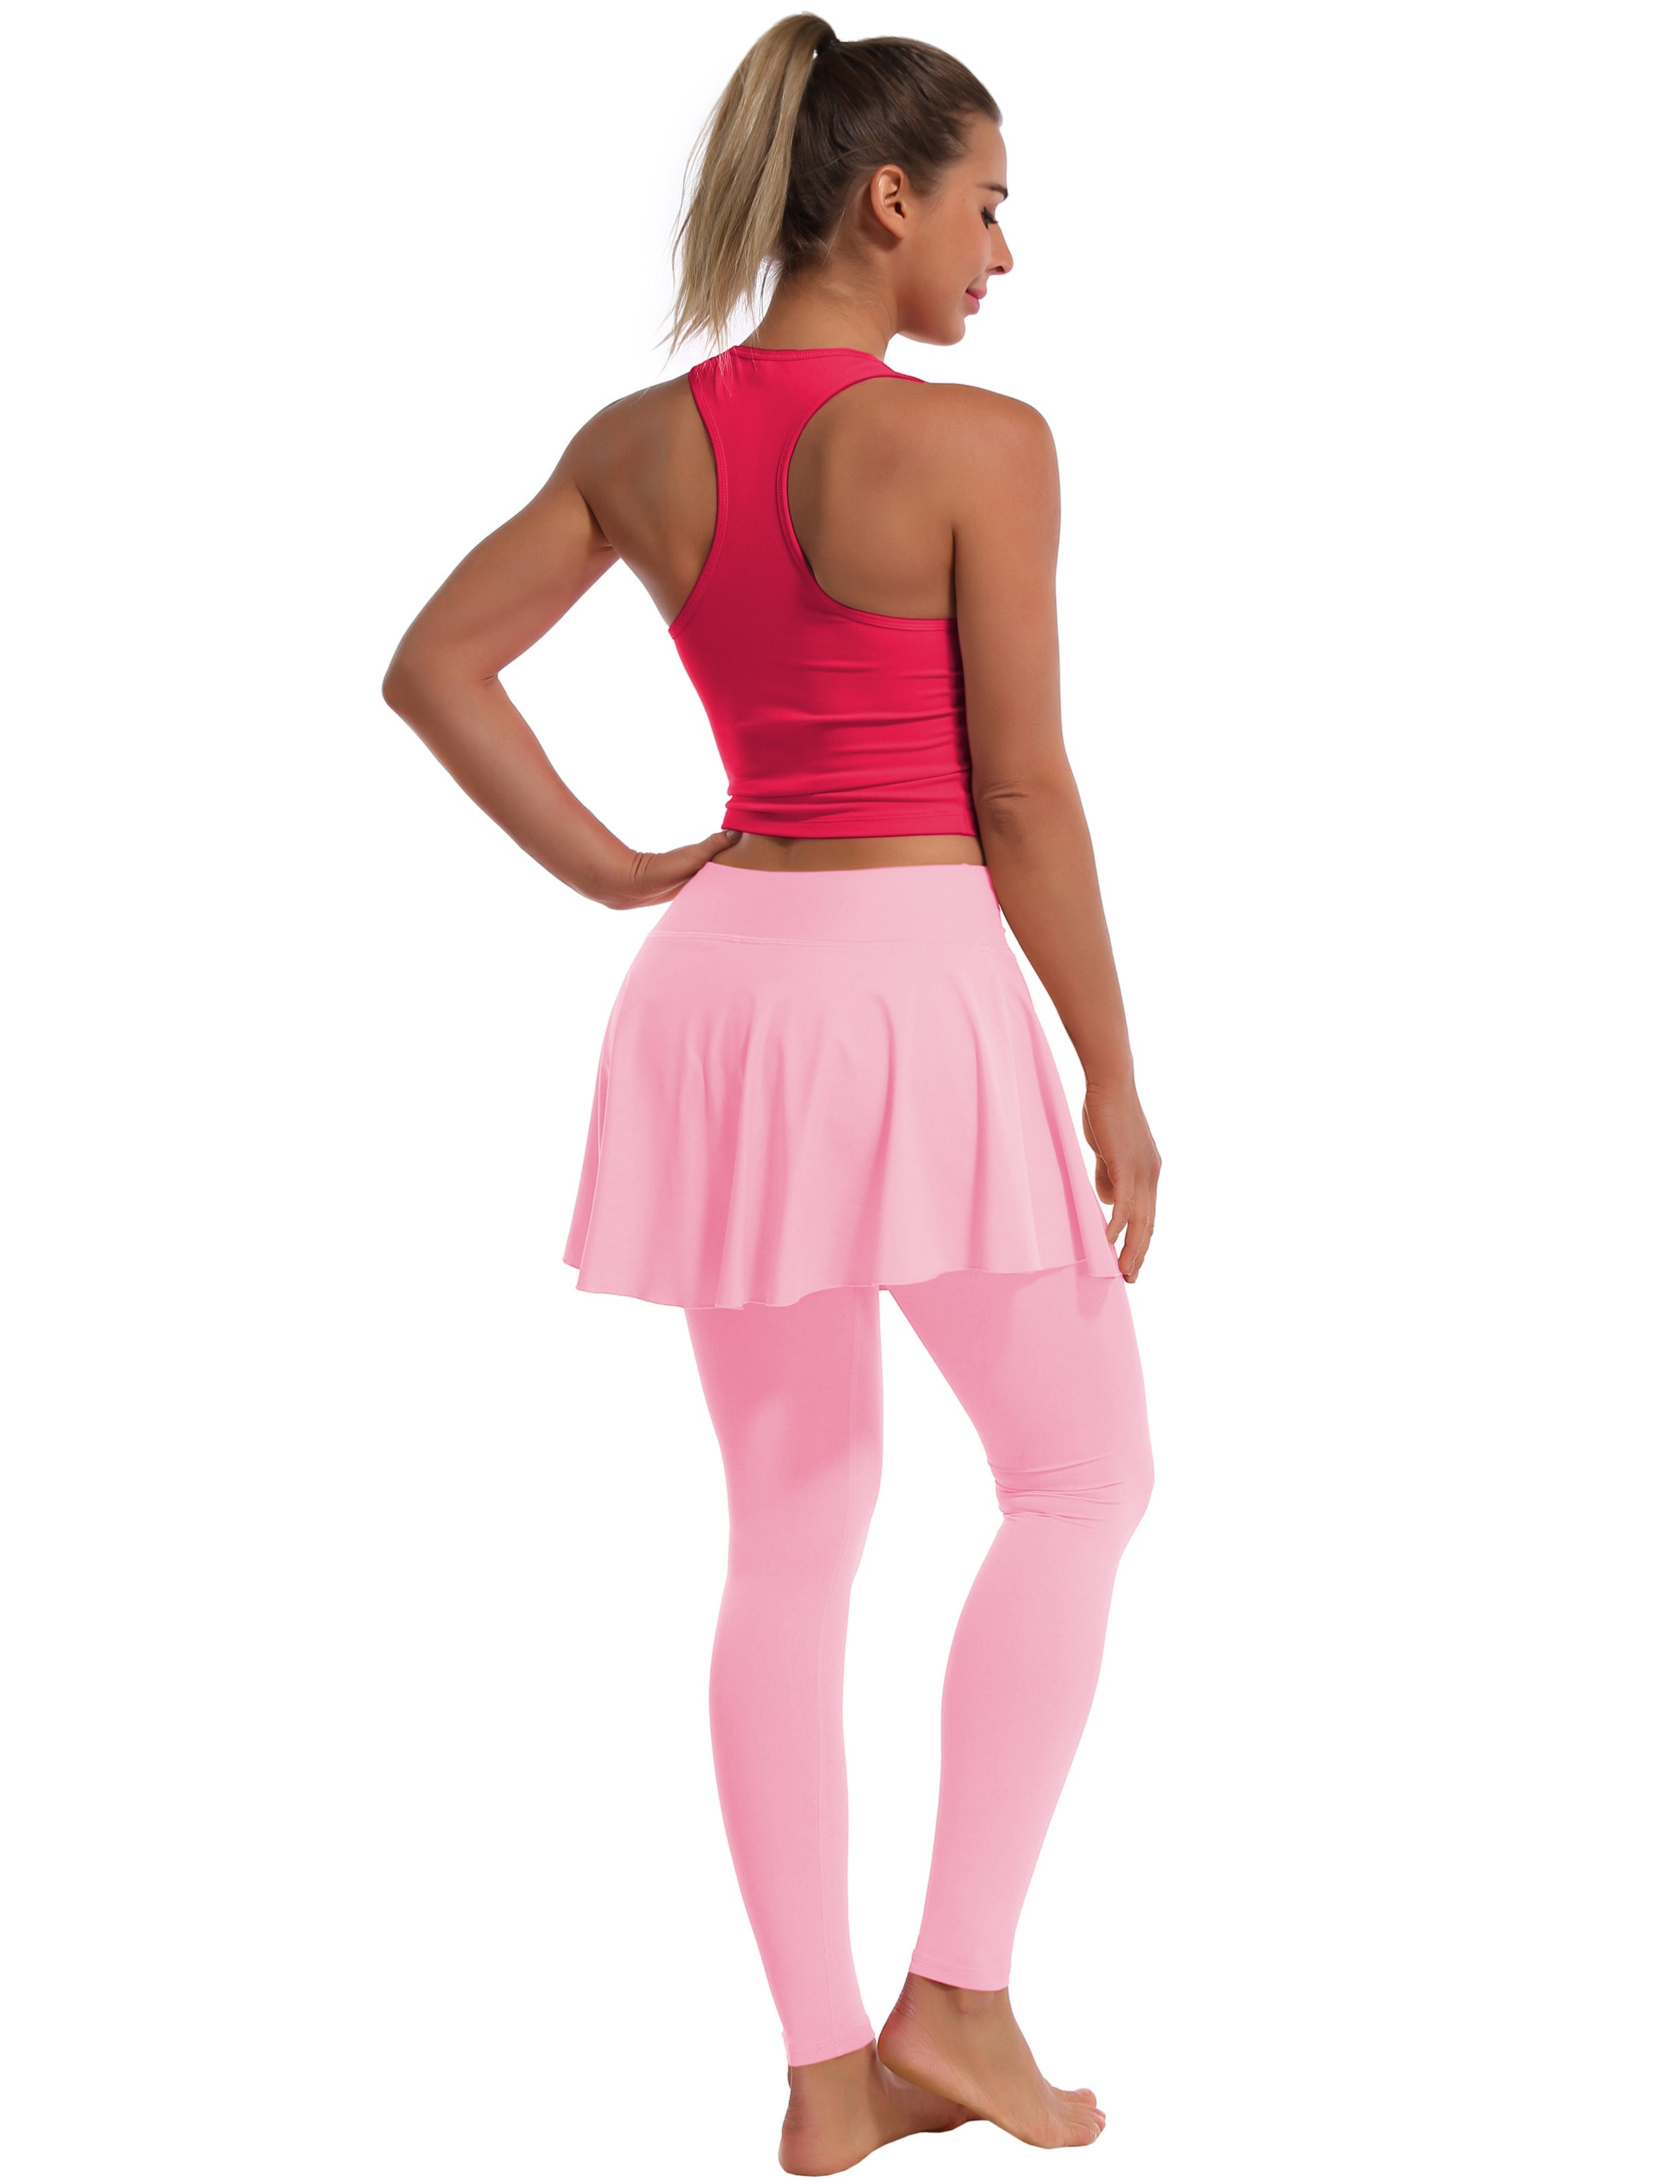 Athletic Tennis Golf Skort with Pocket Shorts lightpink 80%Nylon/20%Spandex UPF 50+ sun protection Elastic closure Lightweight, Wrinkle Moisture wicking Quick drying Secure & comfortable two layer Hidden pocket